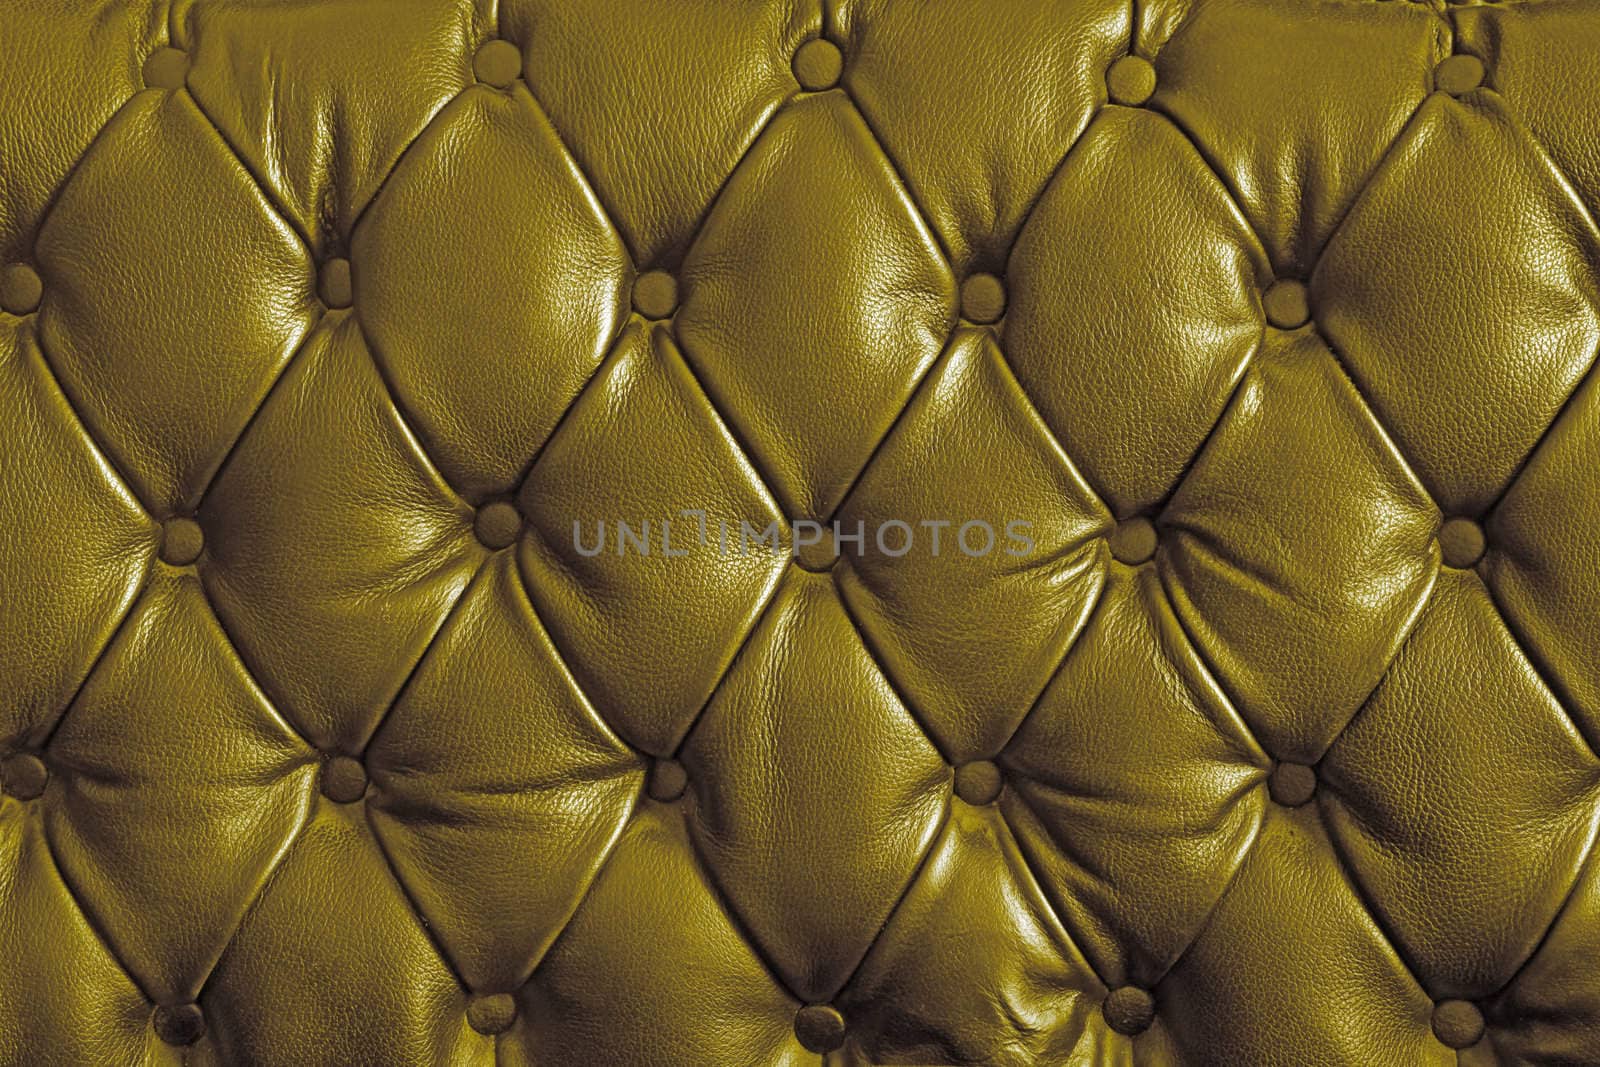 gold genuine leather by vichie81